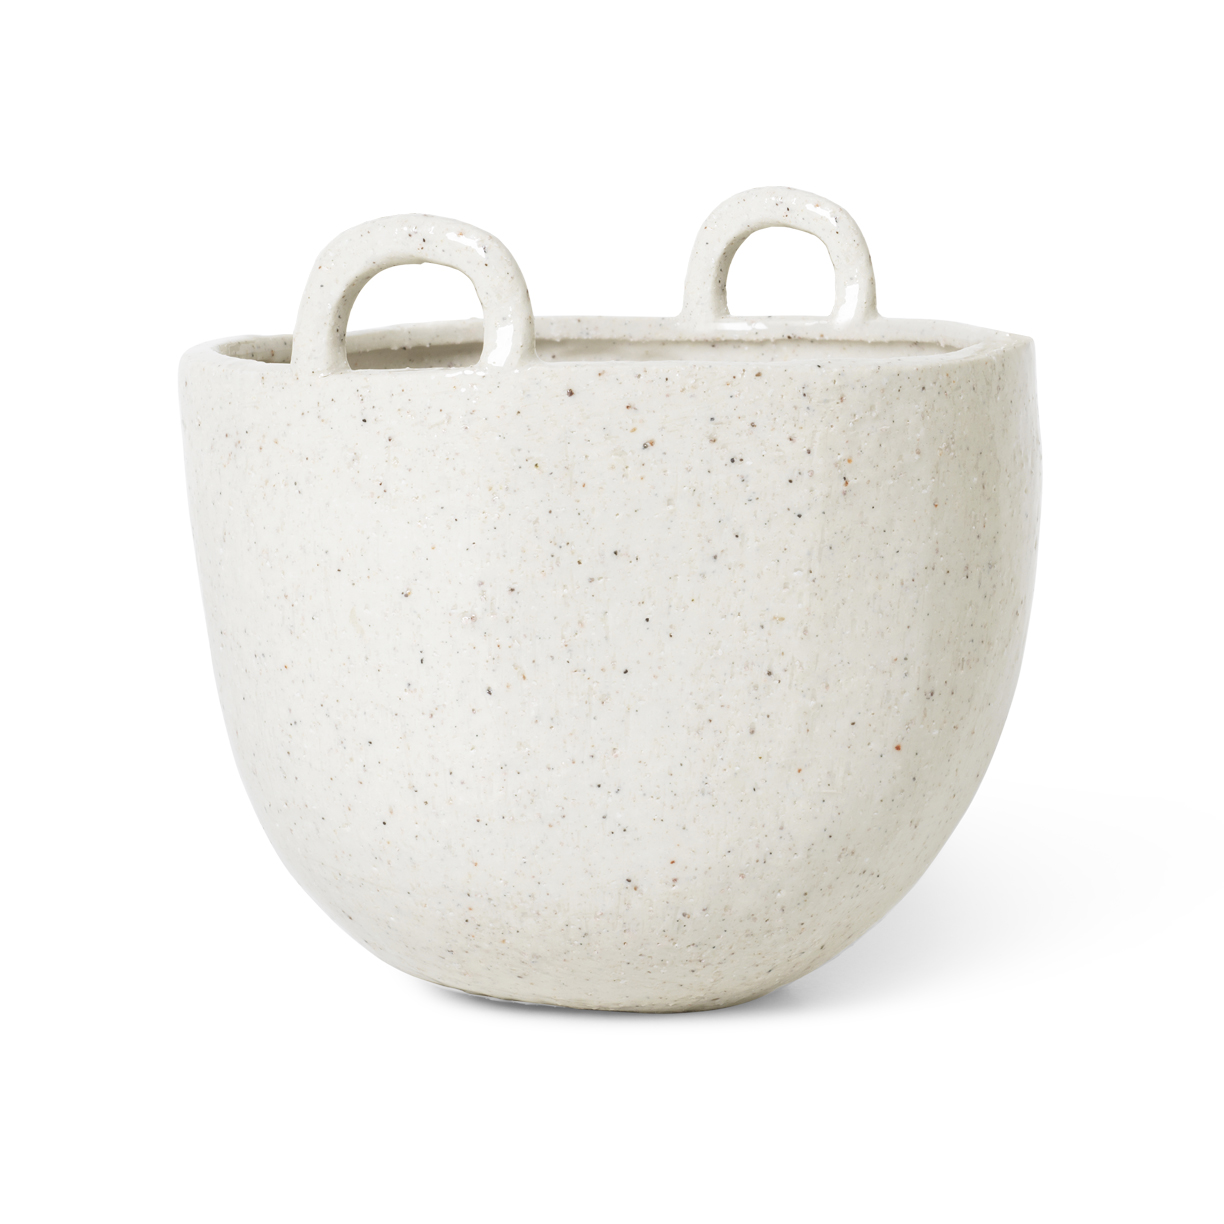 Liba watering can from Ferm Living - NordicNest.com